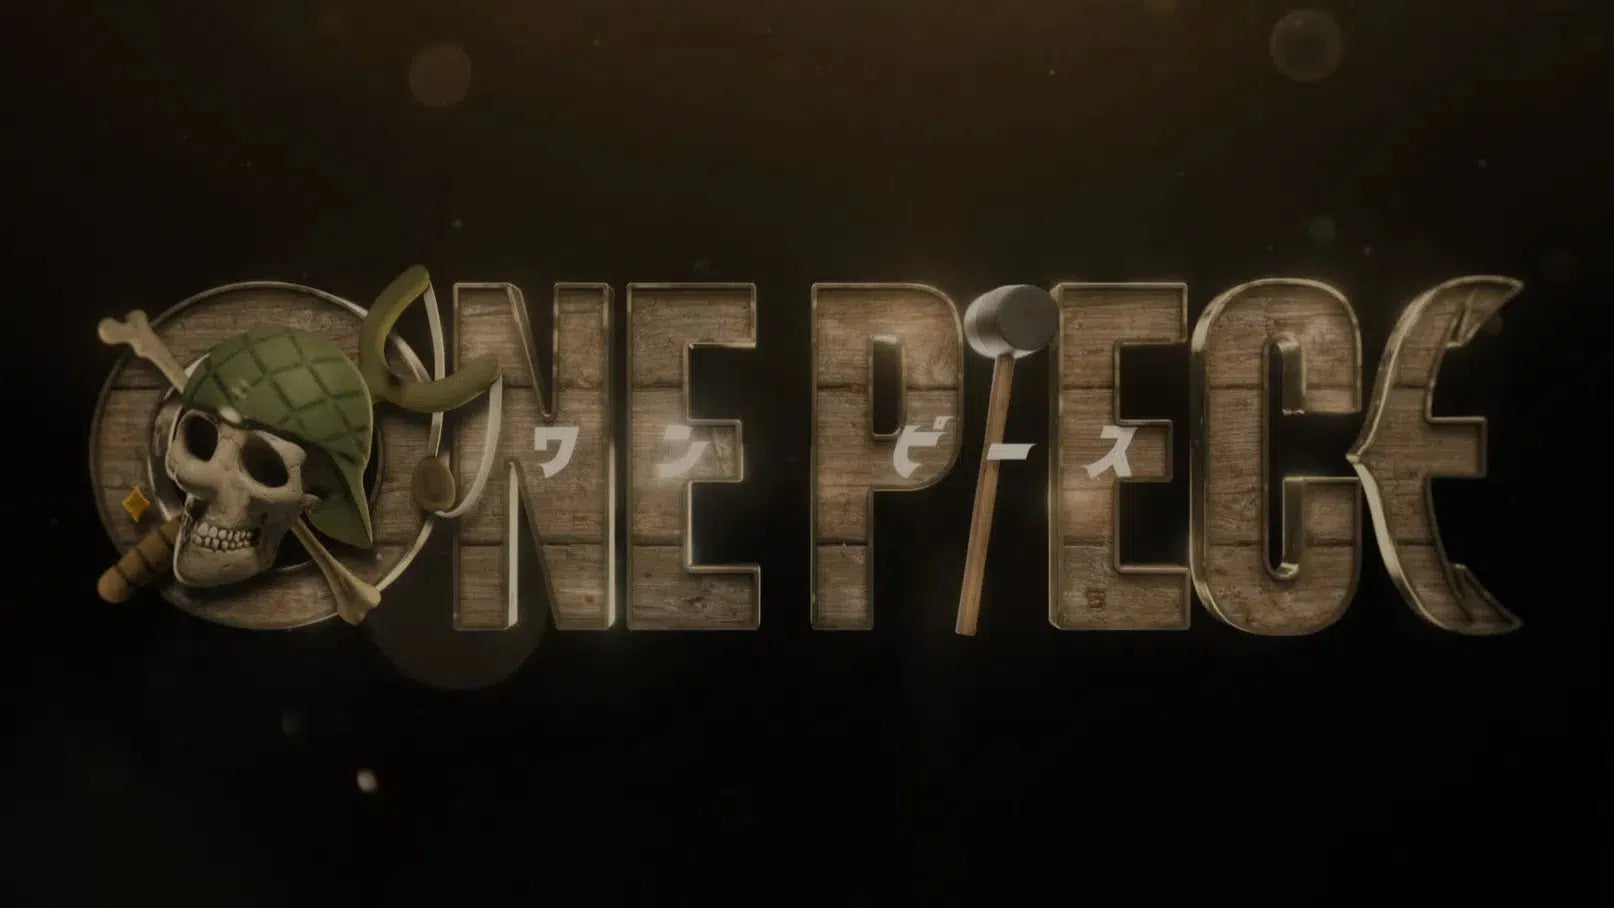 One Piece Live Action Episode 3 Tell No Tales Episode 3 Logo